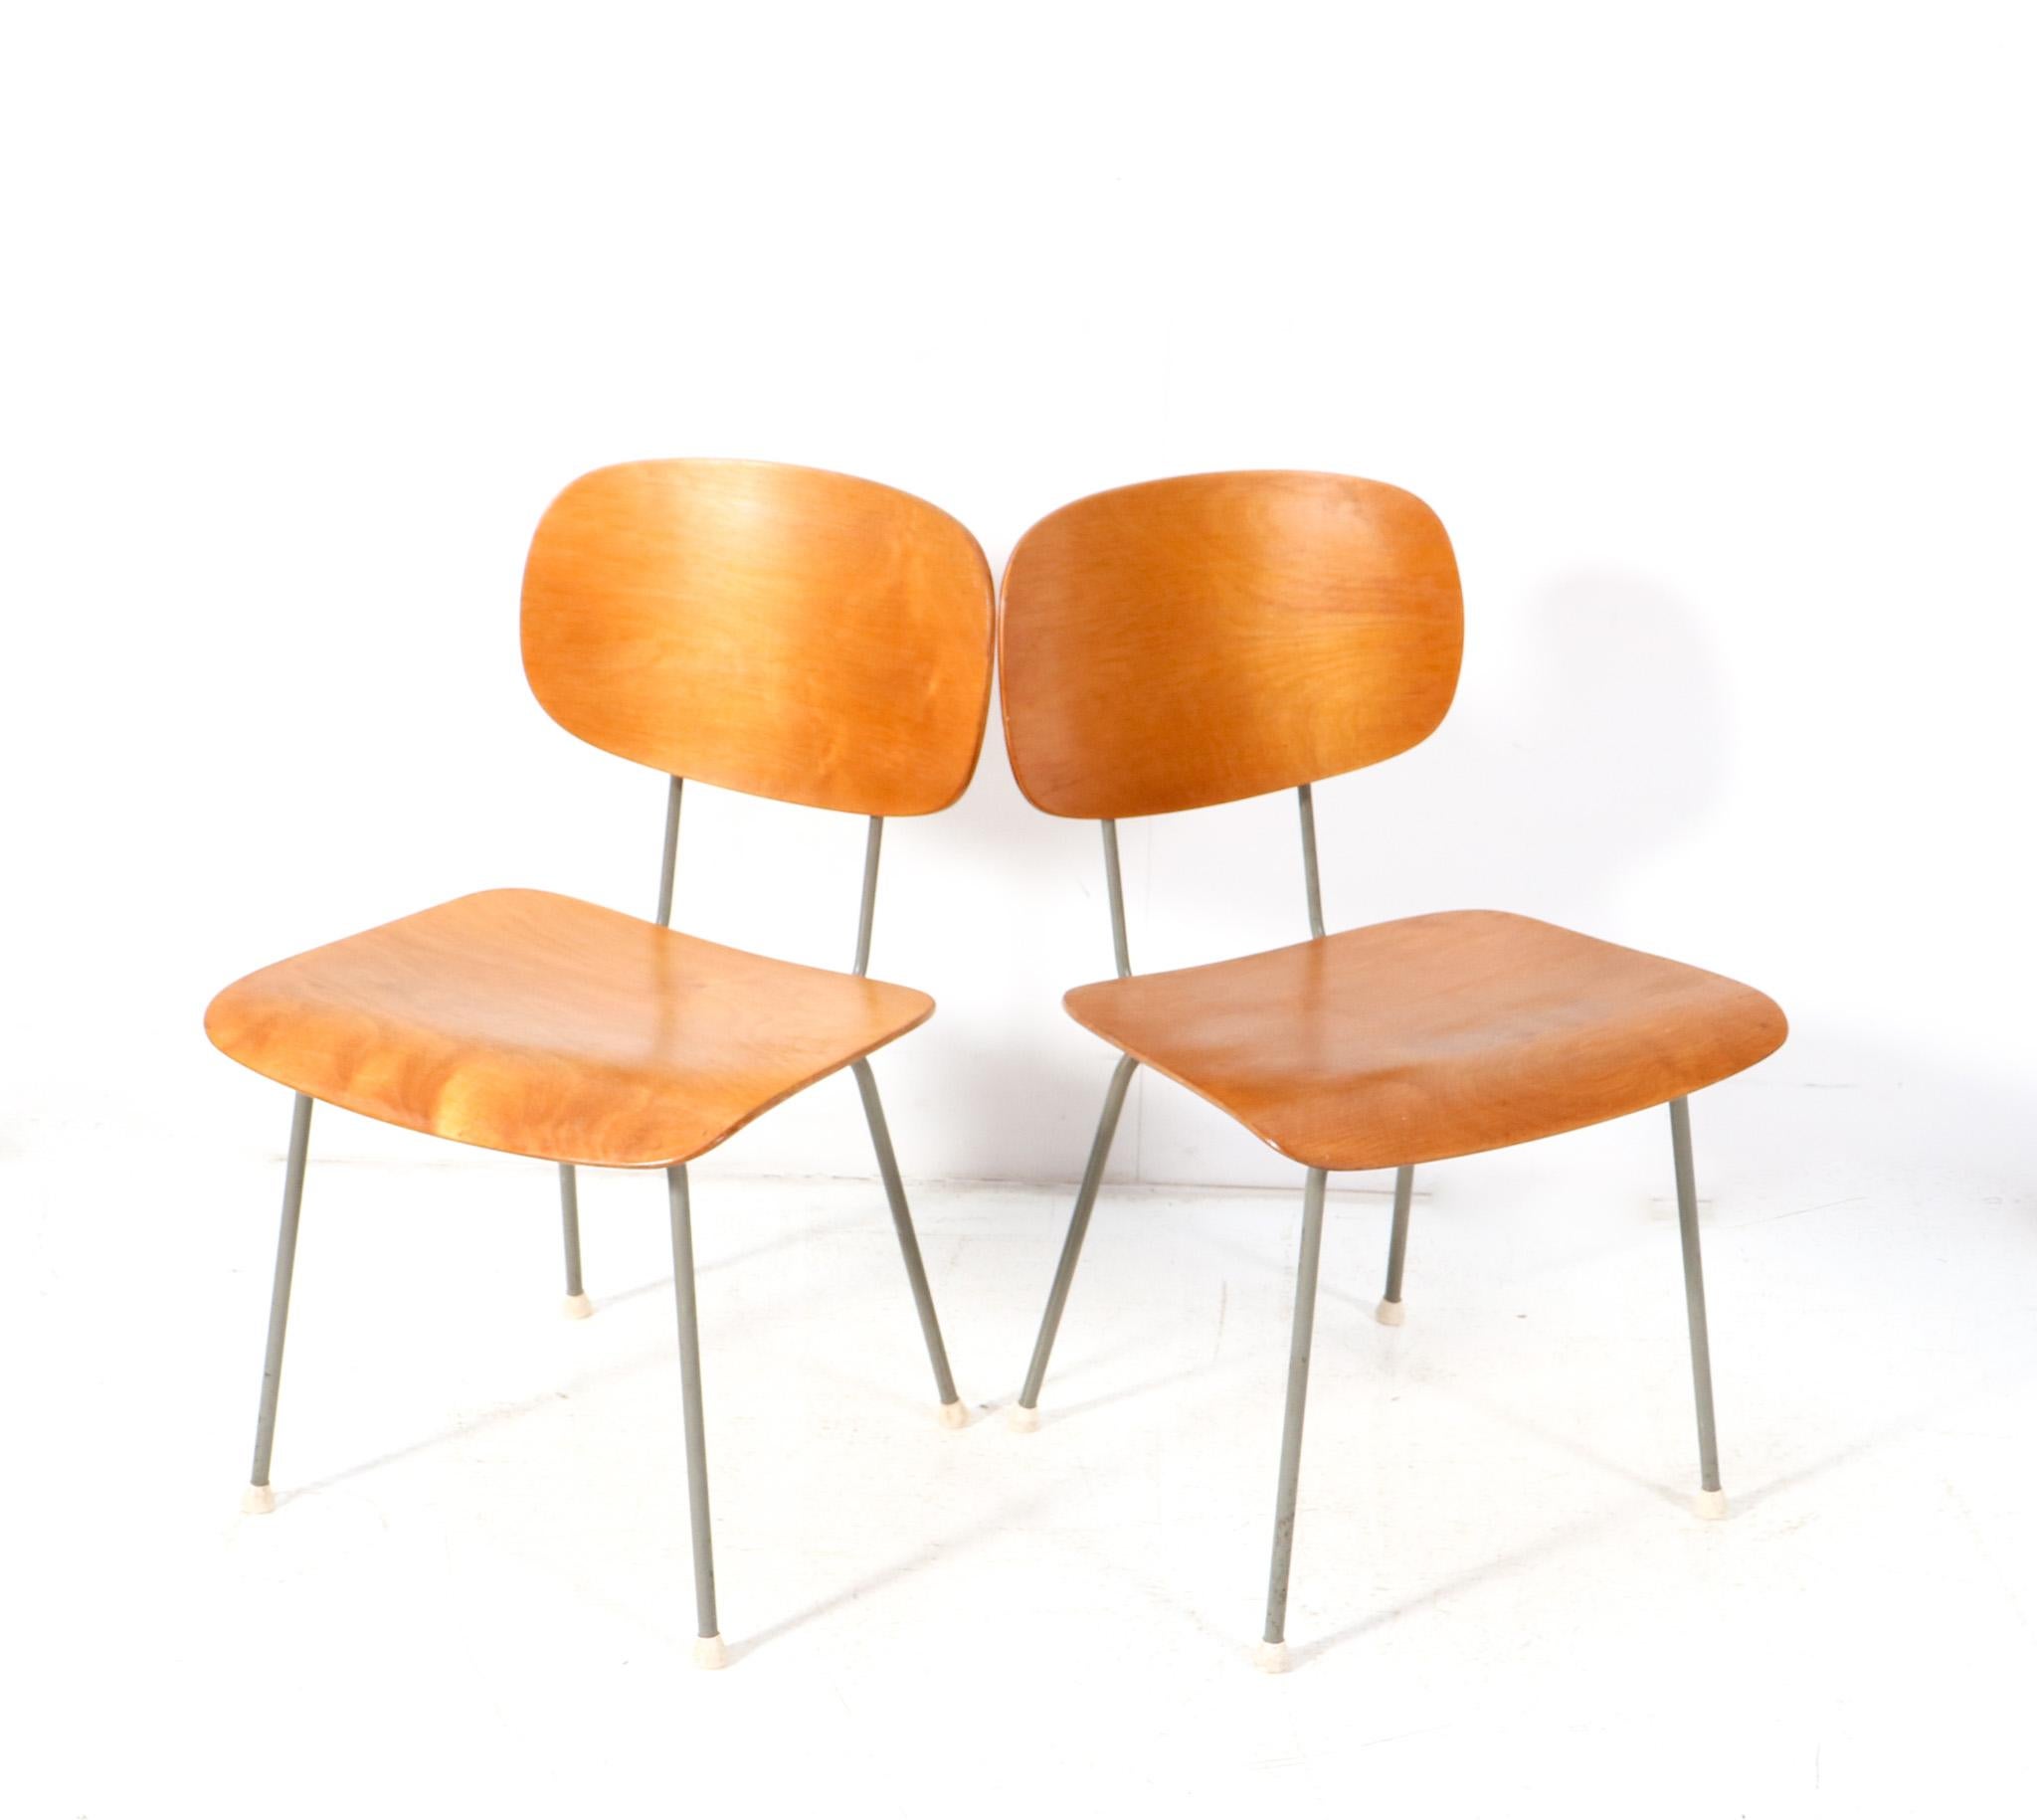 Stunning and elegant pair of Mid-Century Modern side chairs.
Design by Wim Rietveld for Gispen.
Original grey lacquered metal frames with original plywood backs and seats.
Marked underneath the seats with the original manufacturers stamp.
This